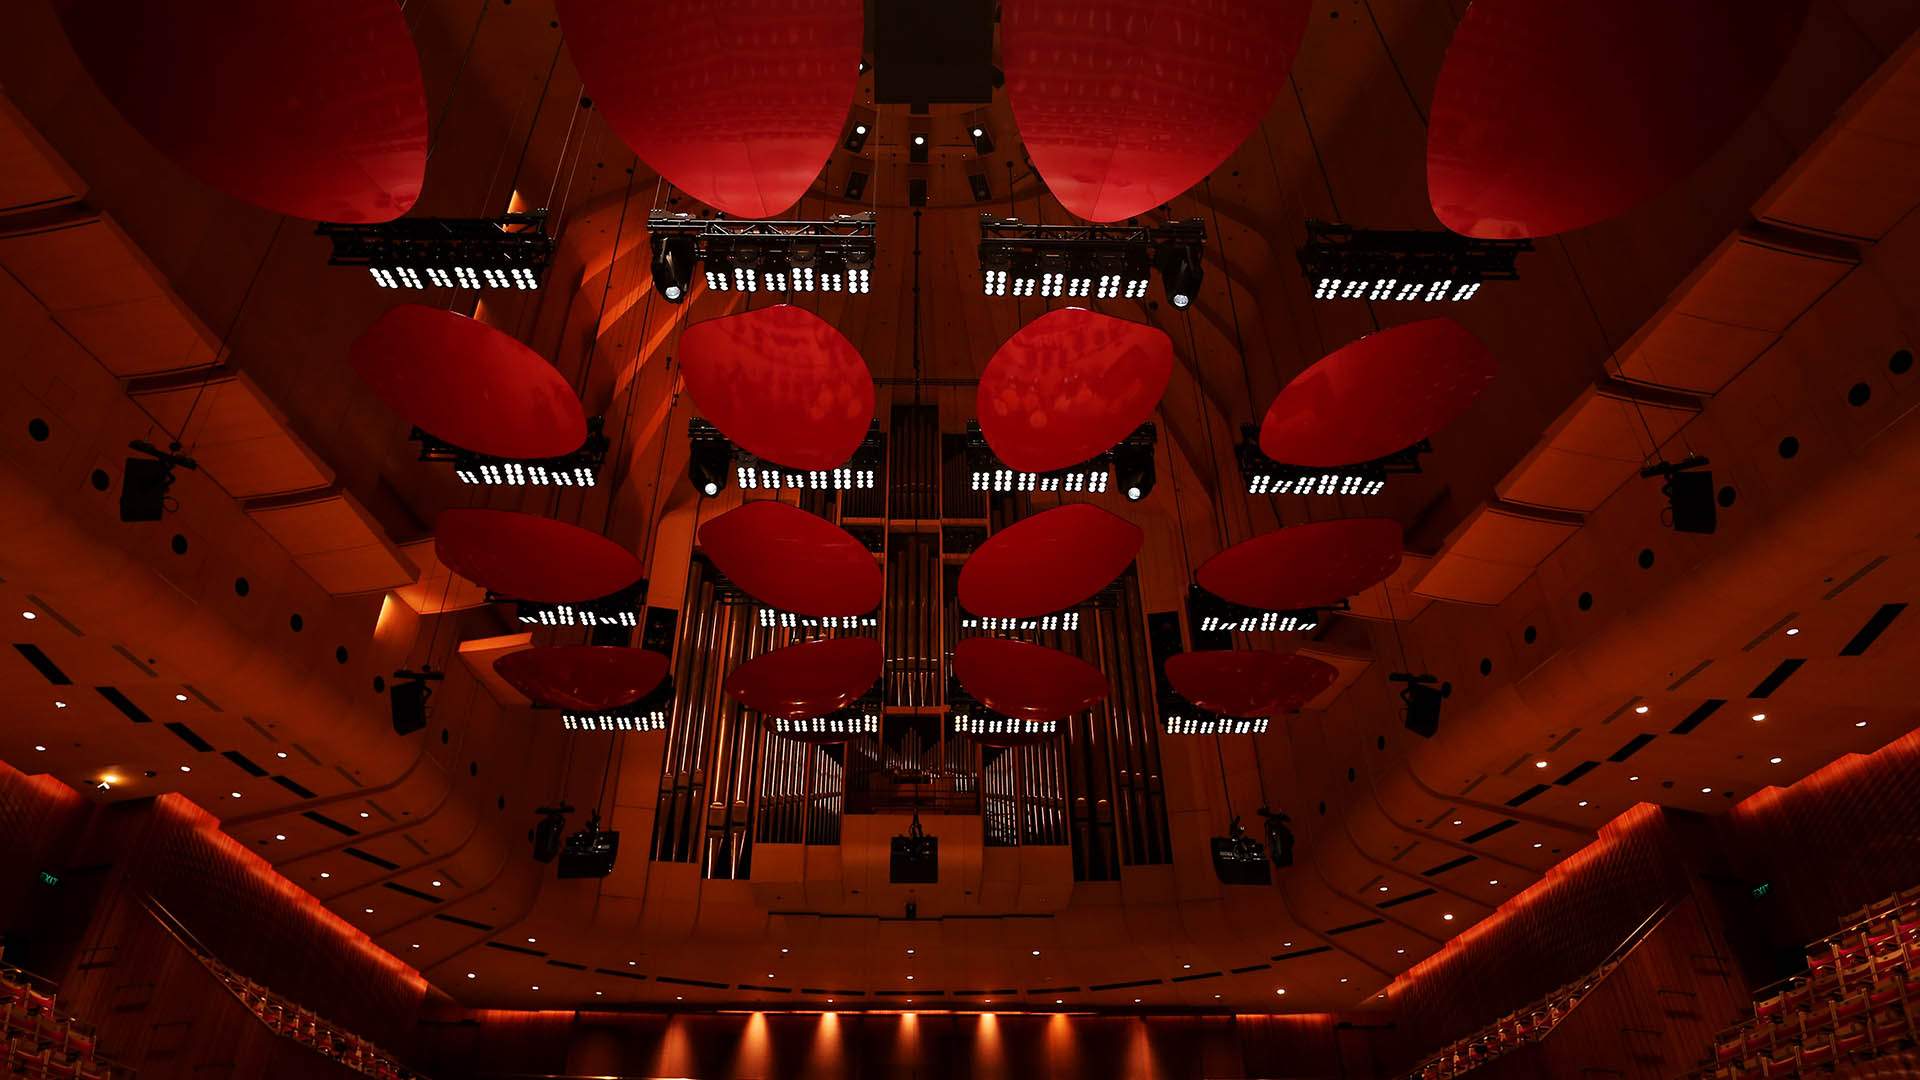 Sydney Opera House Has Unveiled Its Stunning, Two-Years-in-the-Making Concert Hall Revamp